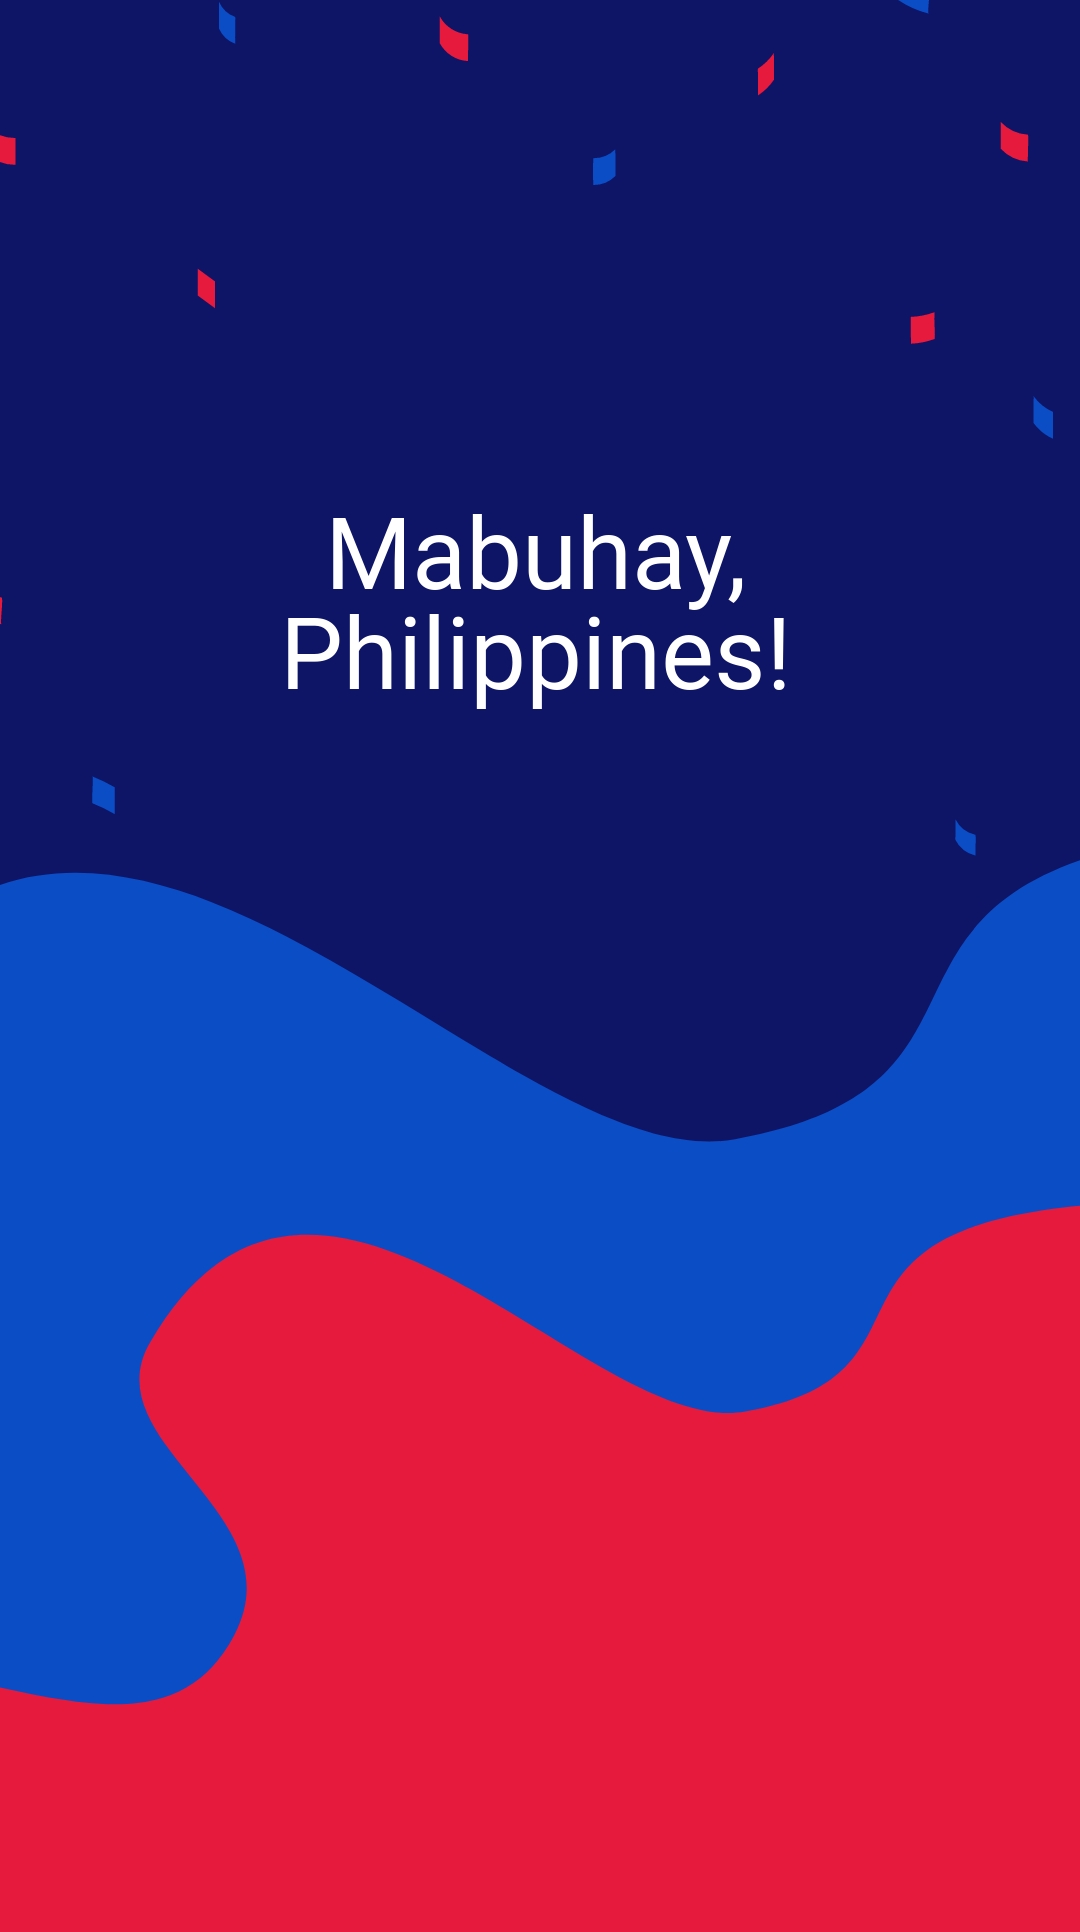 Philippines Independence Day Celebration Instagram Story Template 4.jpe